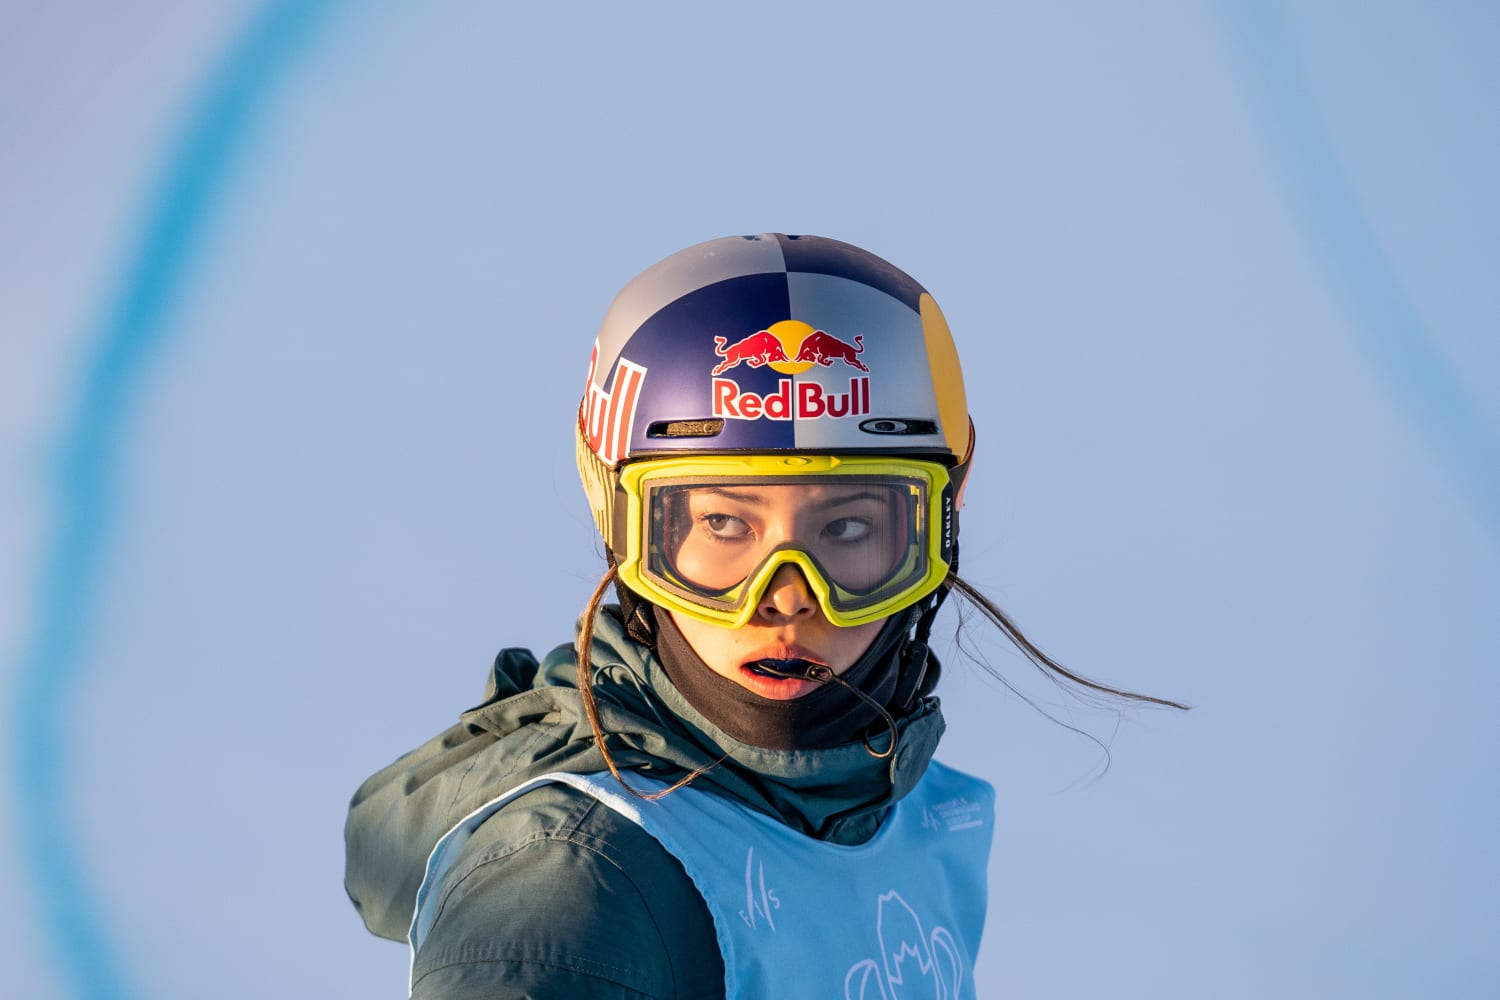 The Freestyle Ski Star Eileen Gu Has a Warning About TikTok Diets - The New  York Times